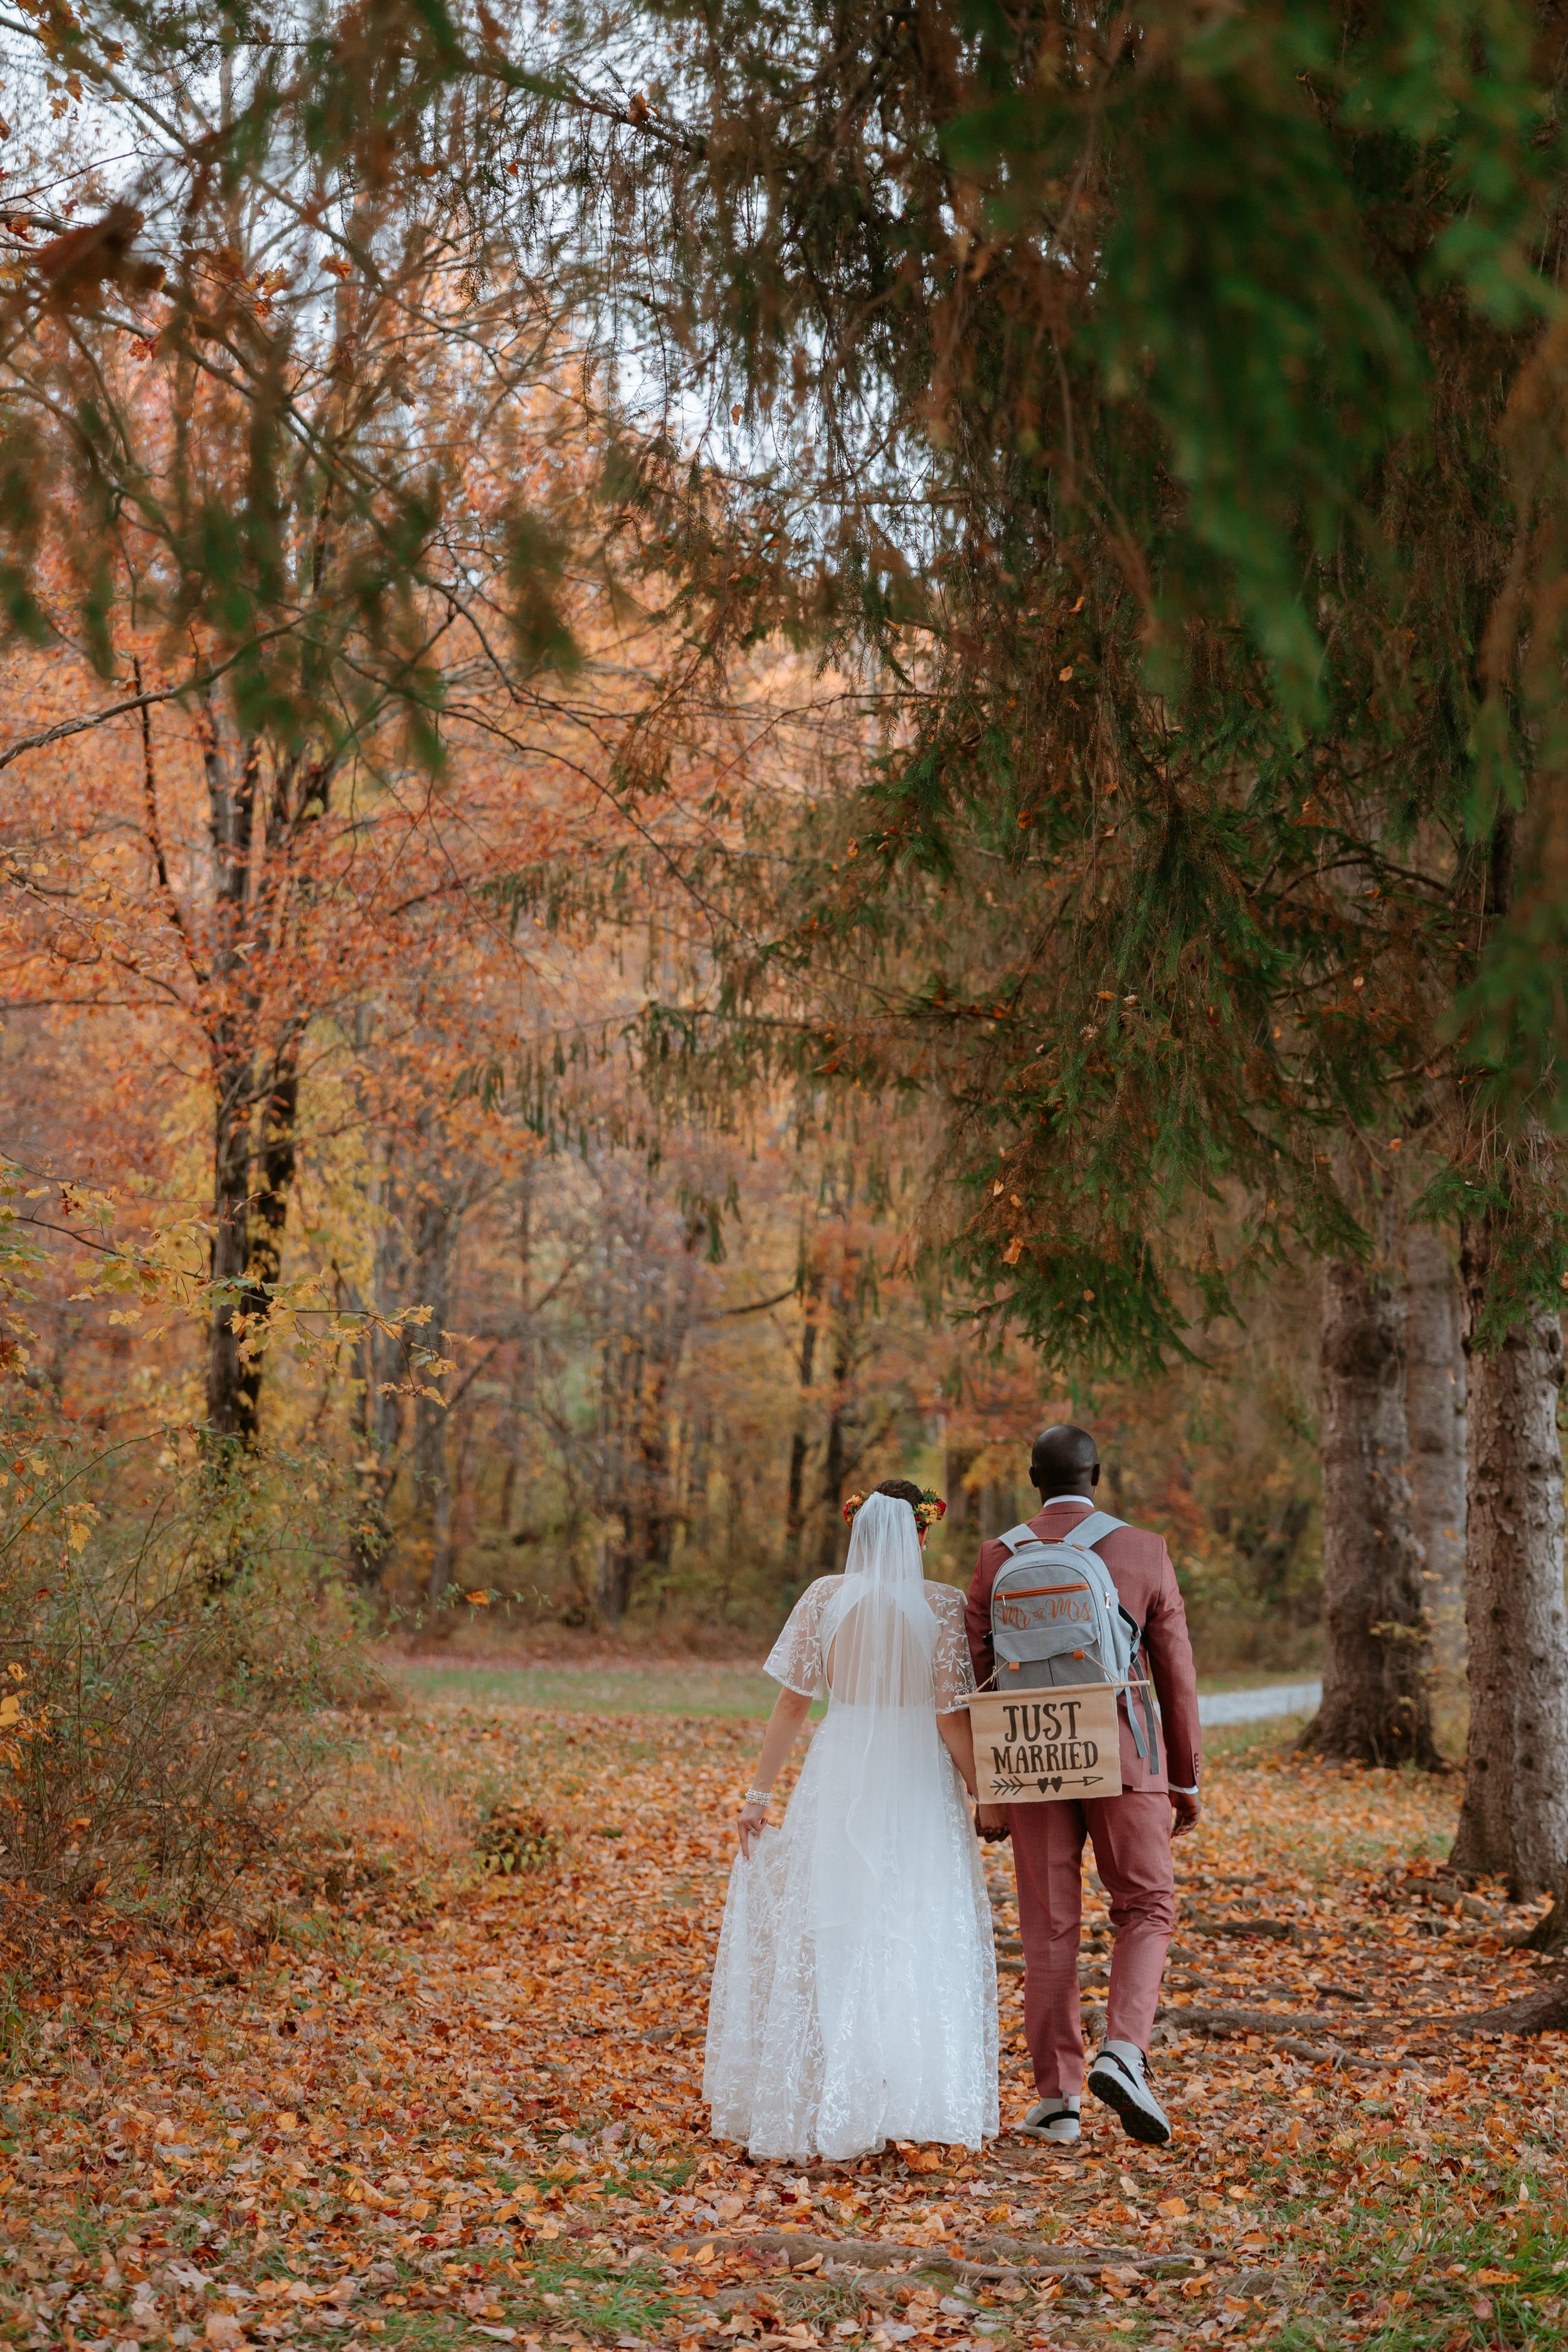 A bride and groom walking through the woods with their backpacks.